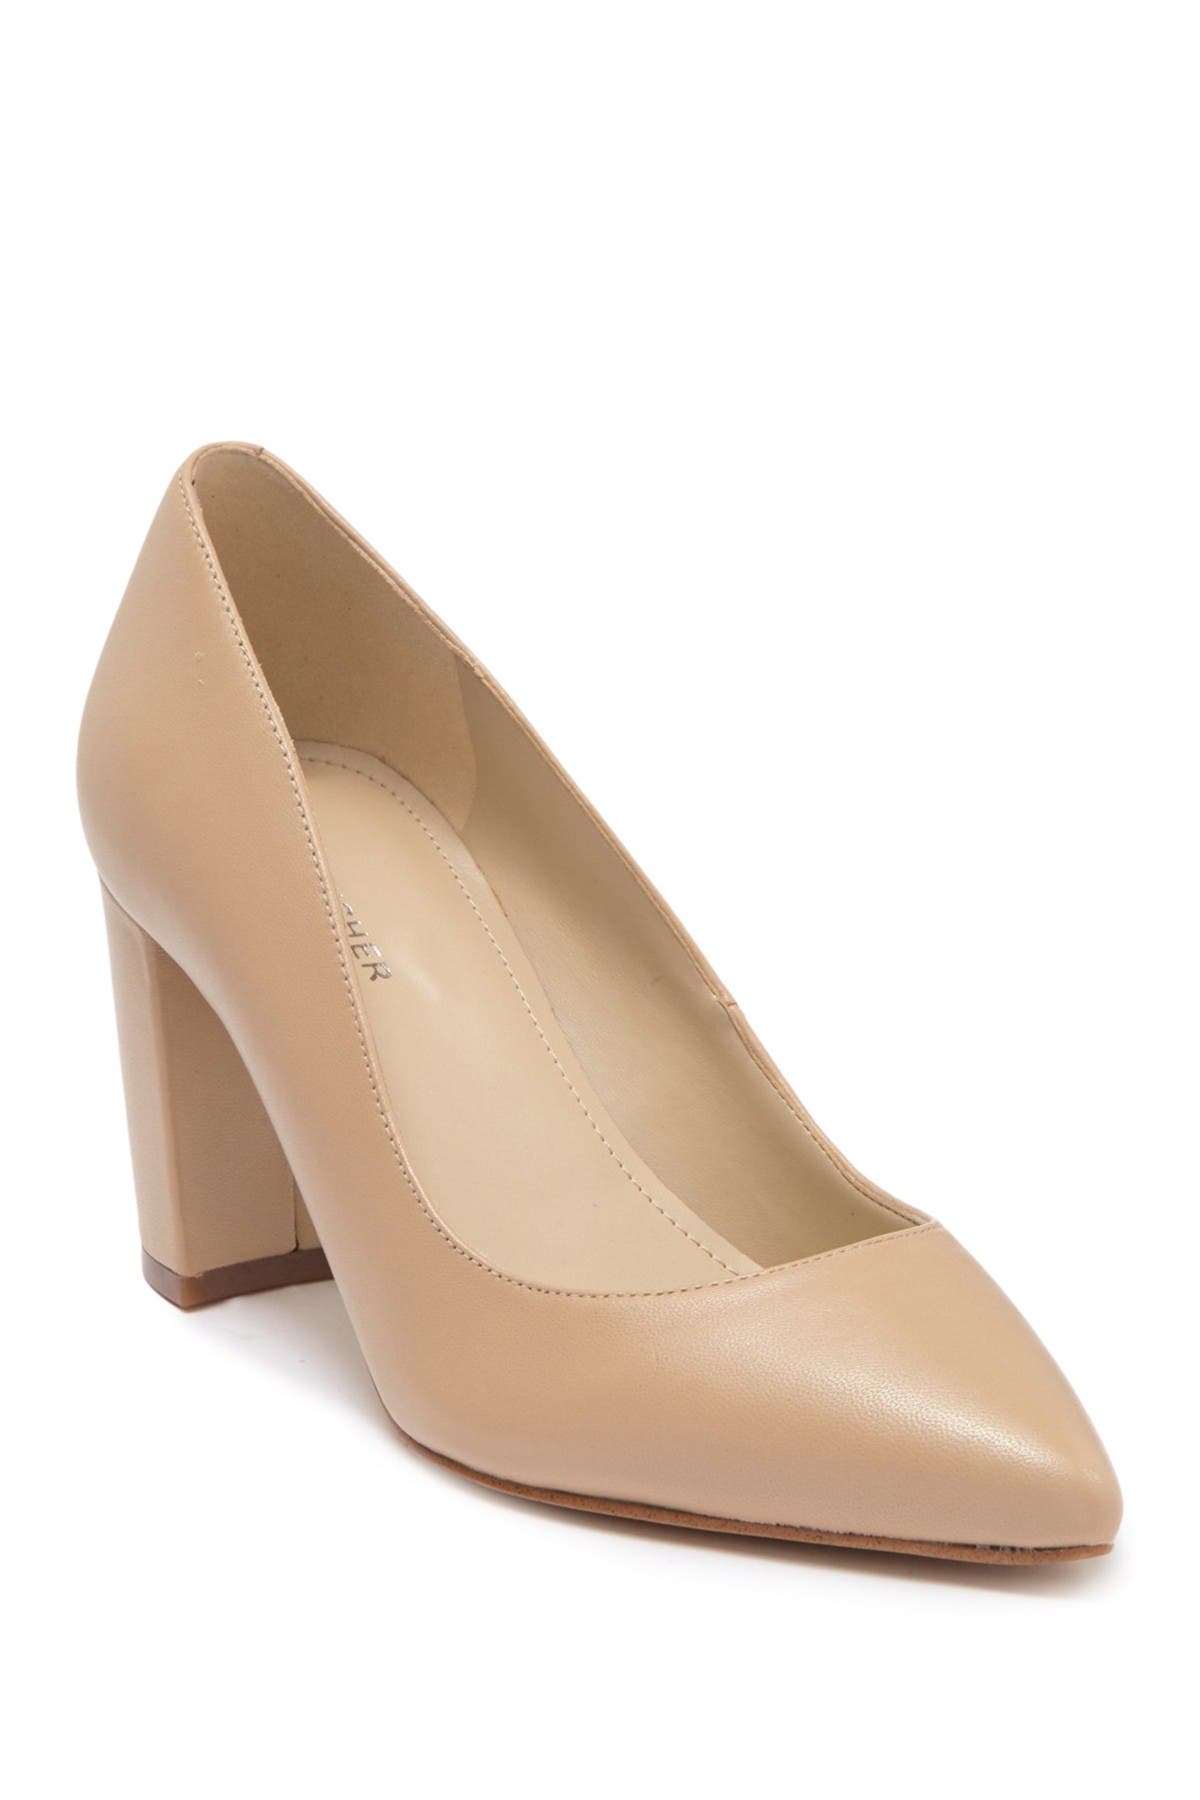 Marc Fisher | Claire Pointed Toe Pump 